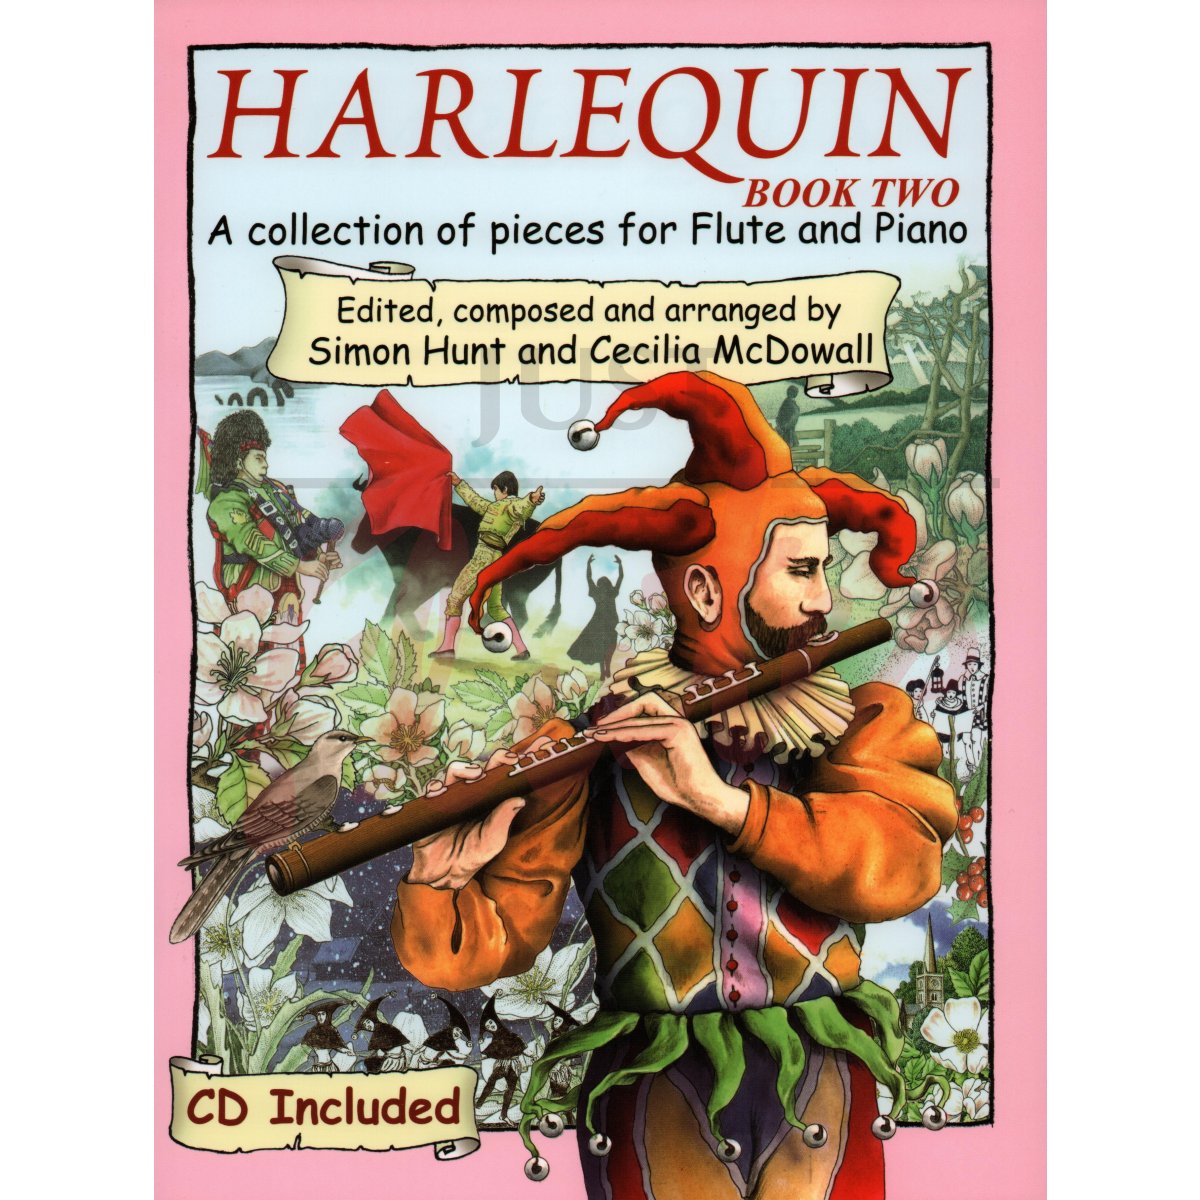 Harlequin for Flute and Piano, Book 2